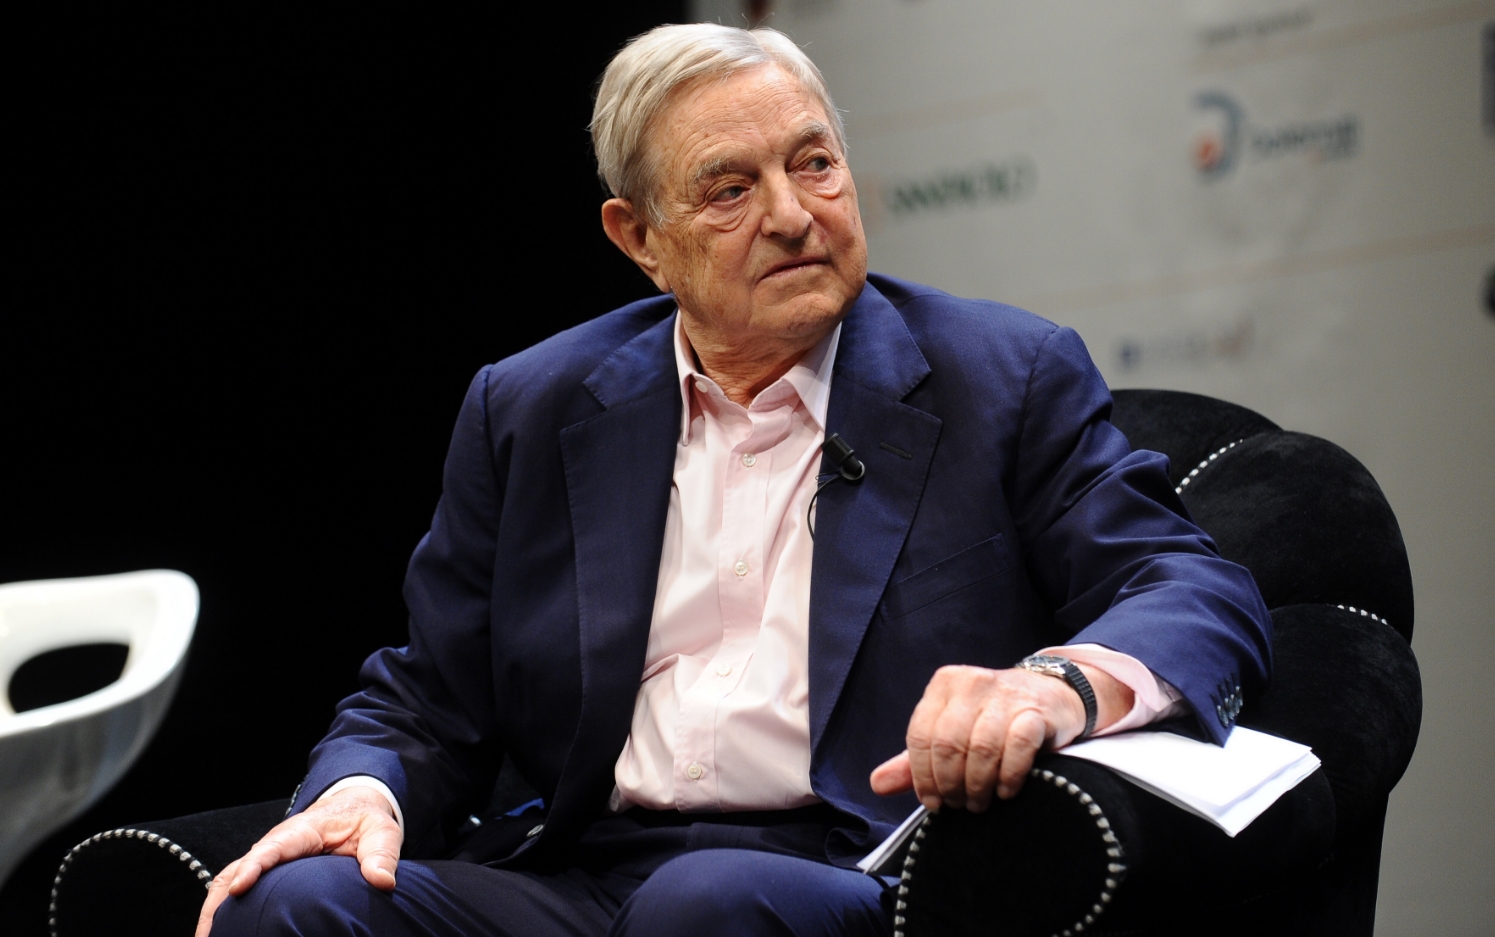 Image: Billionaires including George Soros establish “Good Information Inc.” to try to discredit indy media sources that expose globalist lies